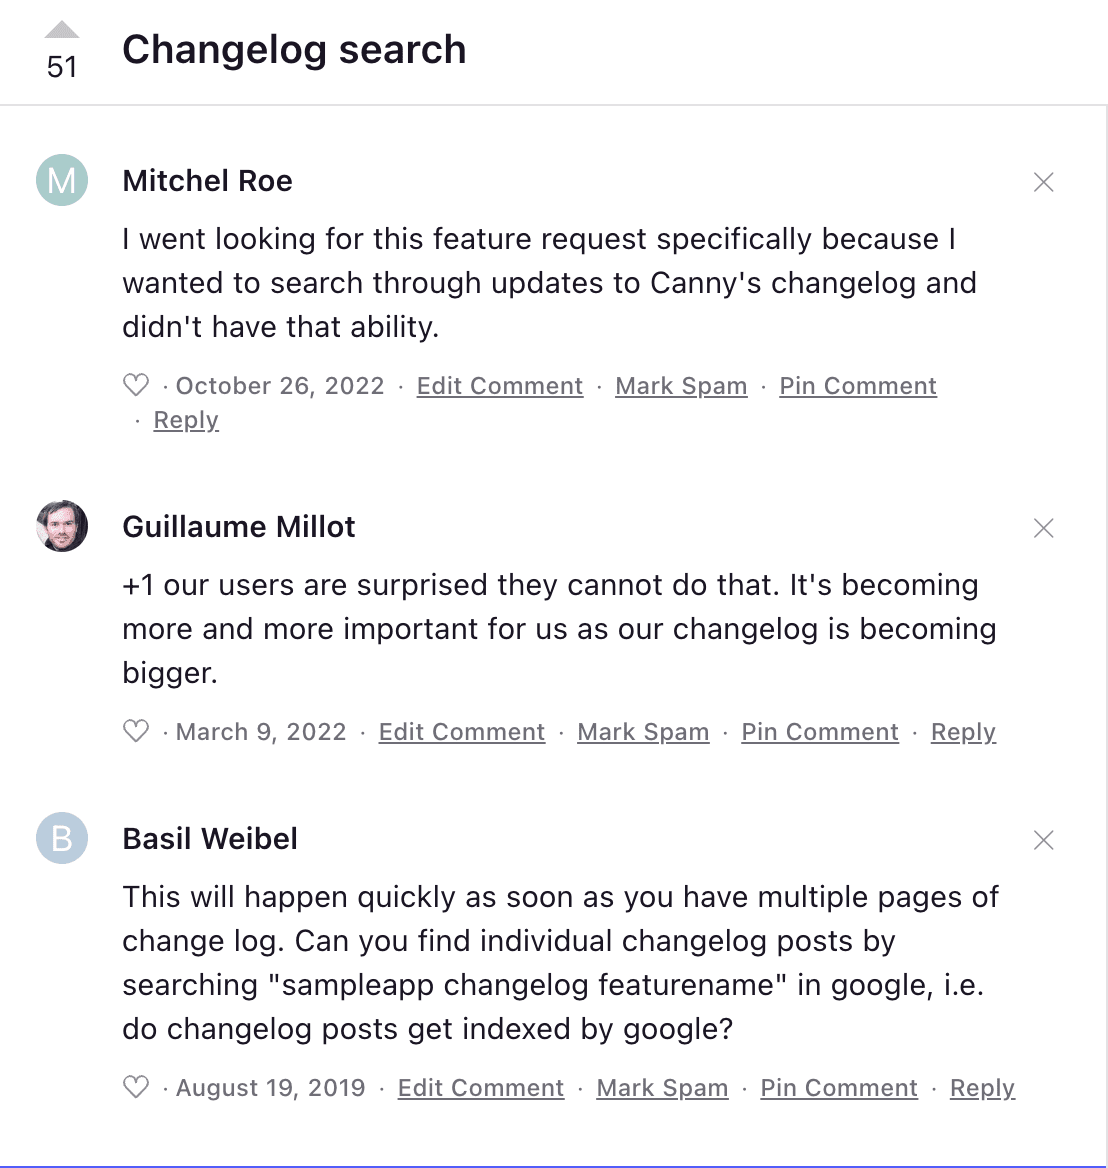 Changelog search discussion